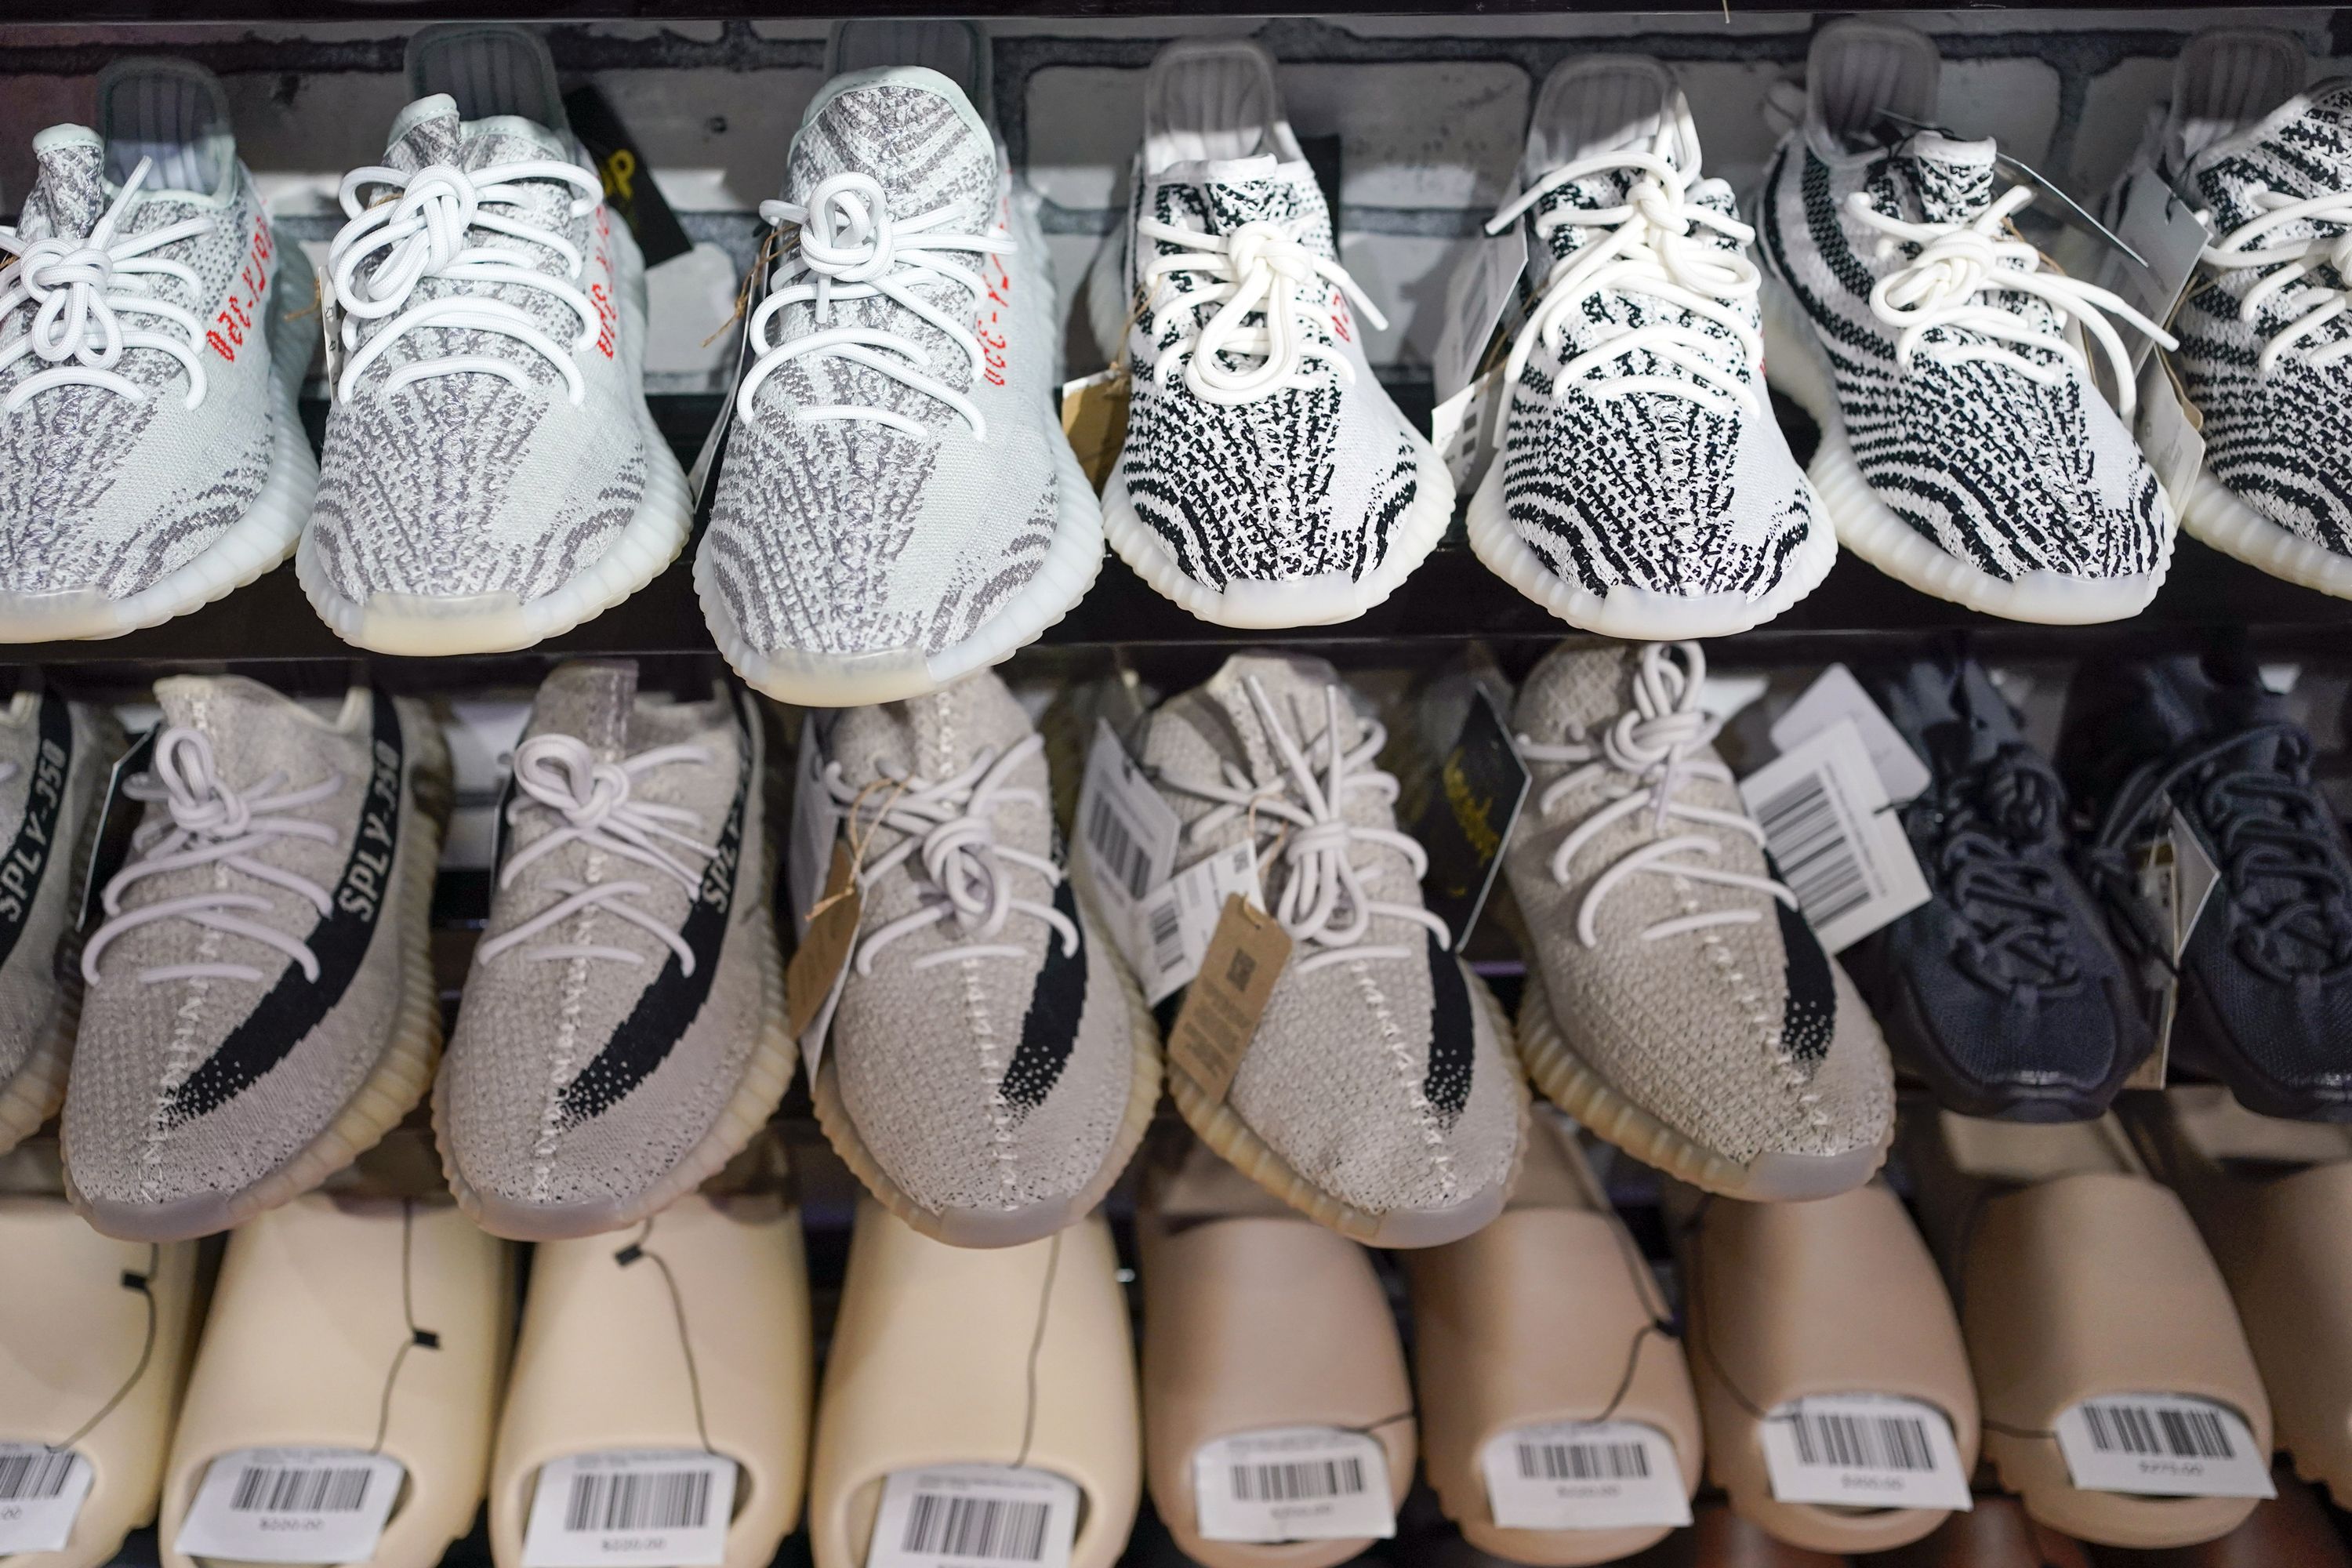 Adidas CEO: Kanye West didn't mean his antisemitic comments